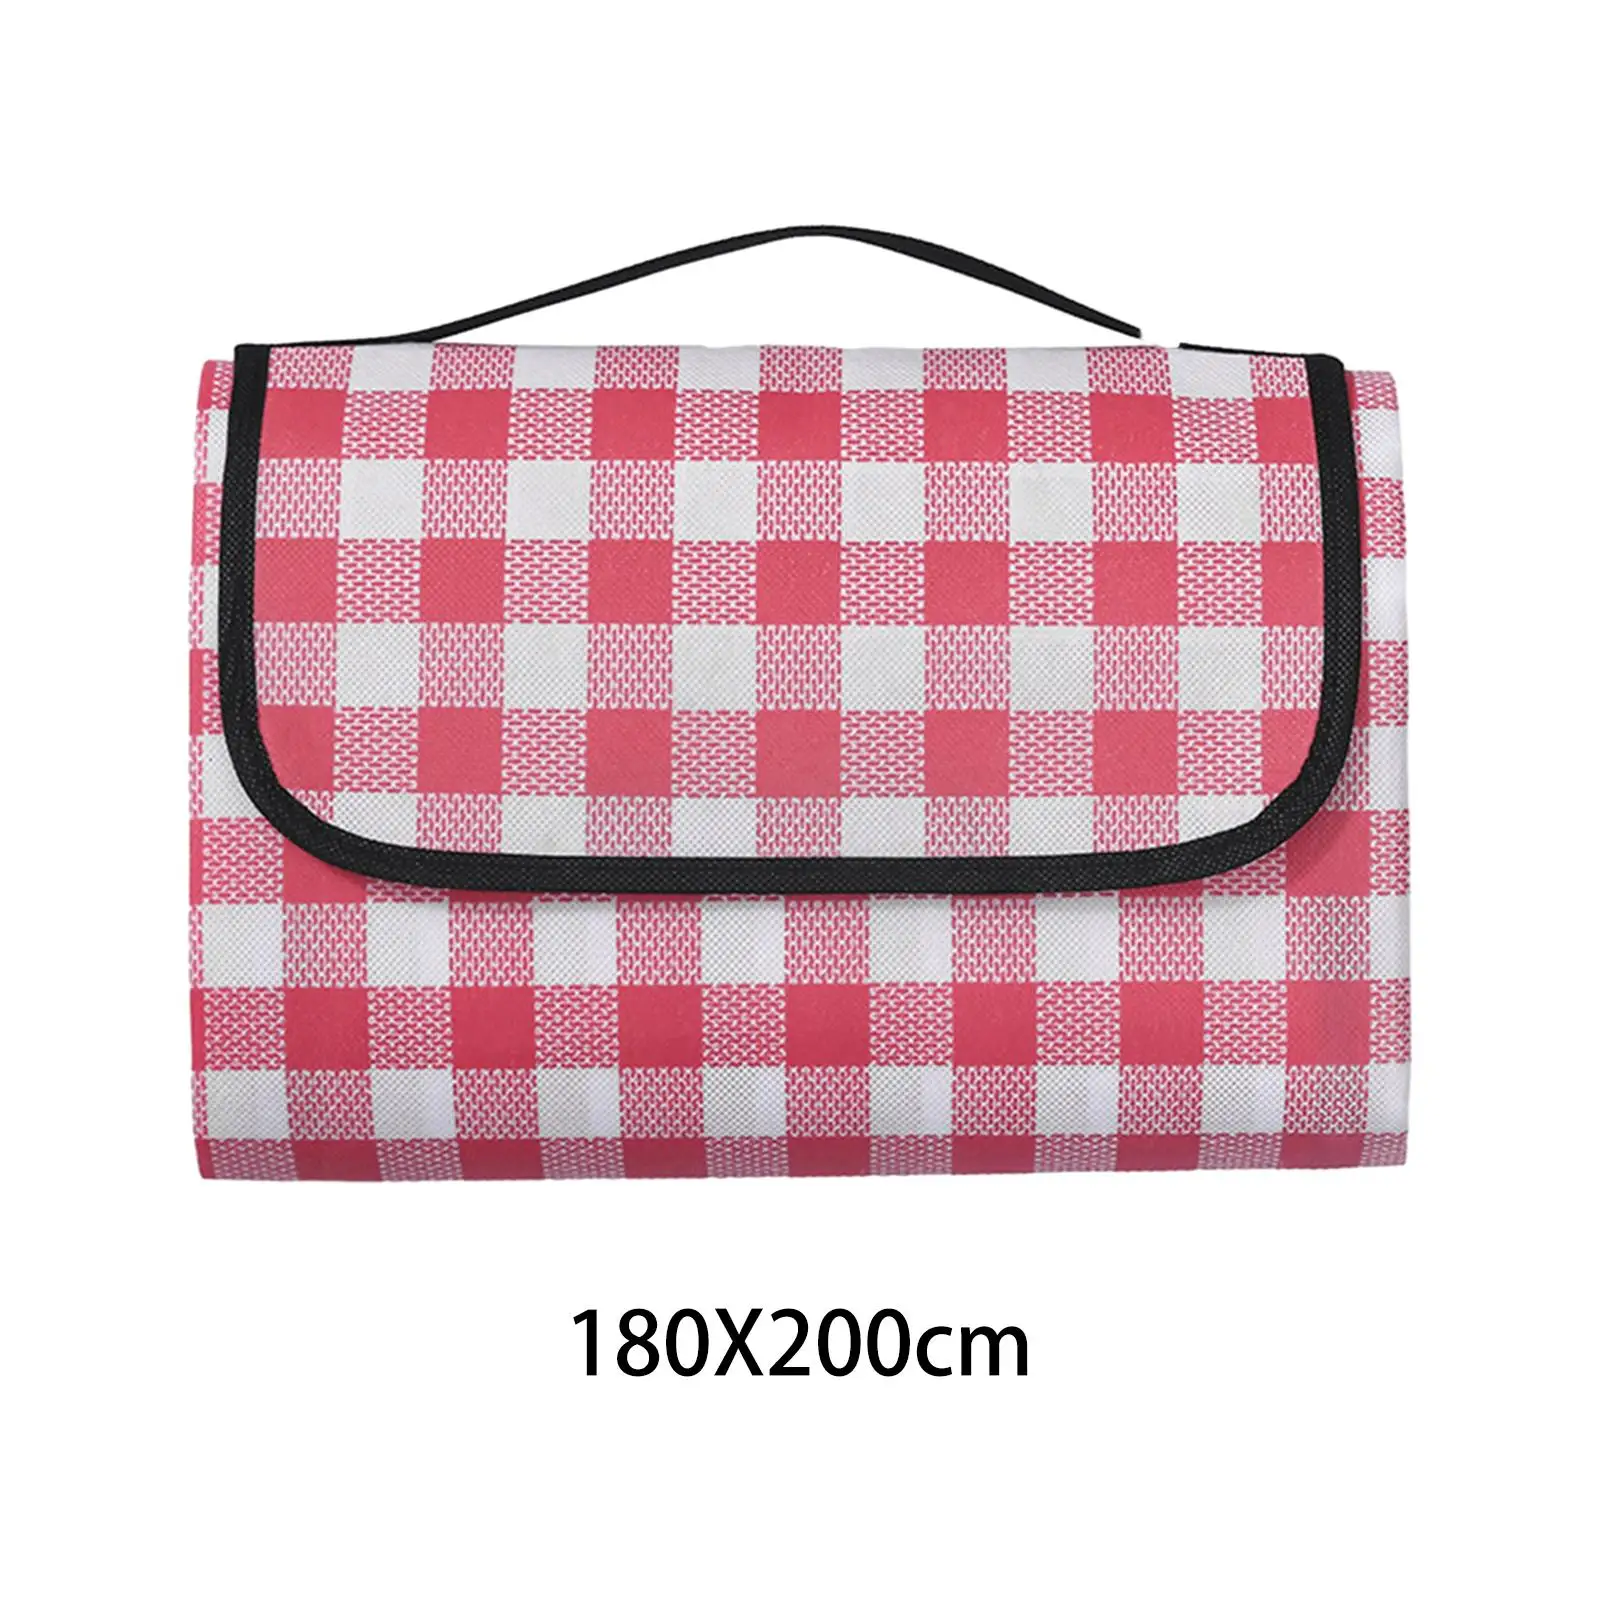 Picnic Blanket Water Resistant Fashion Beach Mat for Barbecue Summer